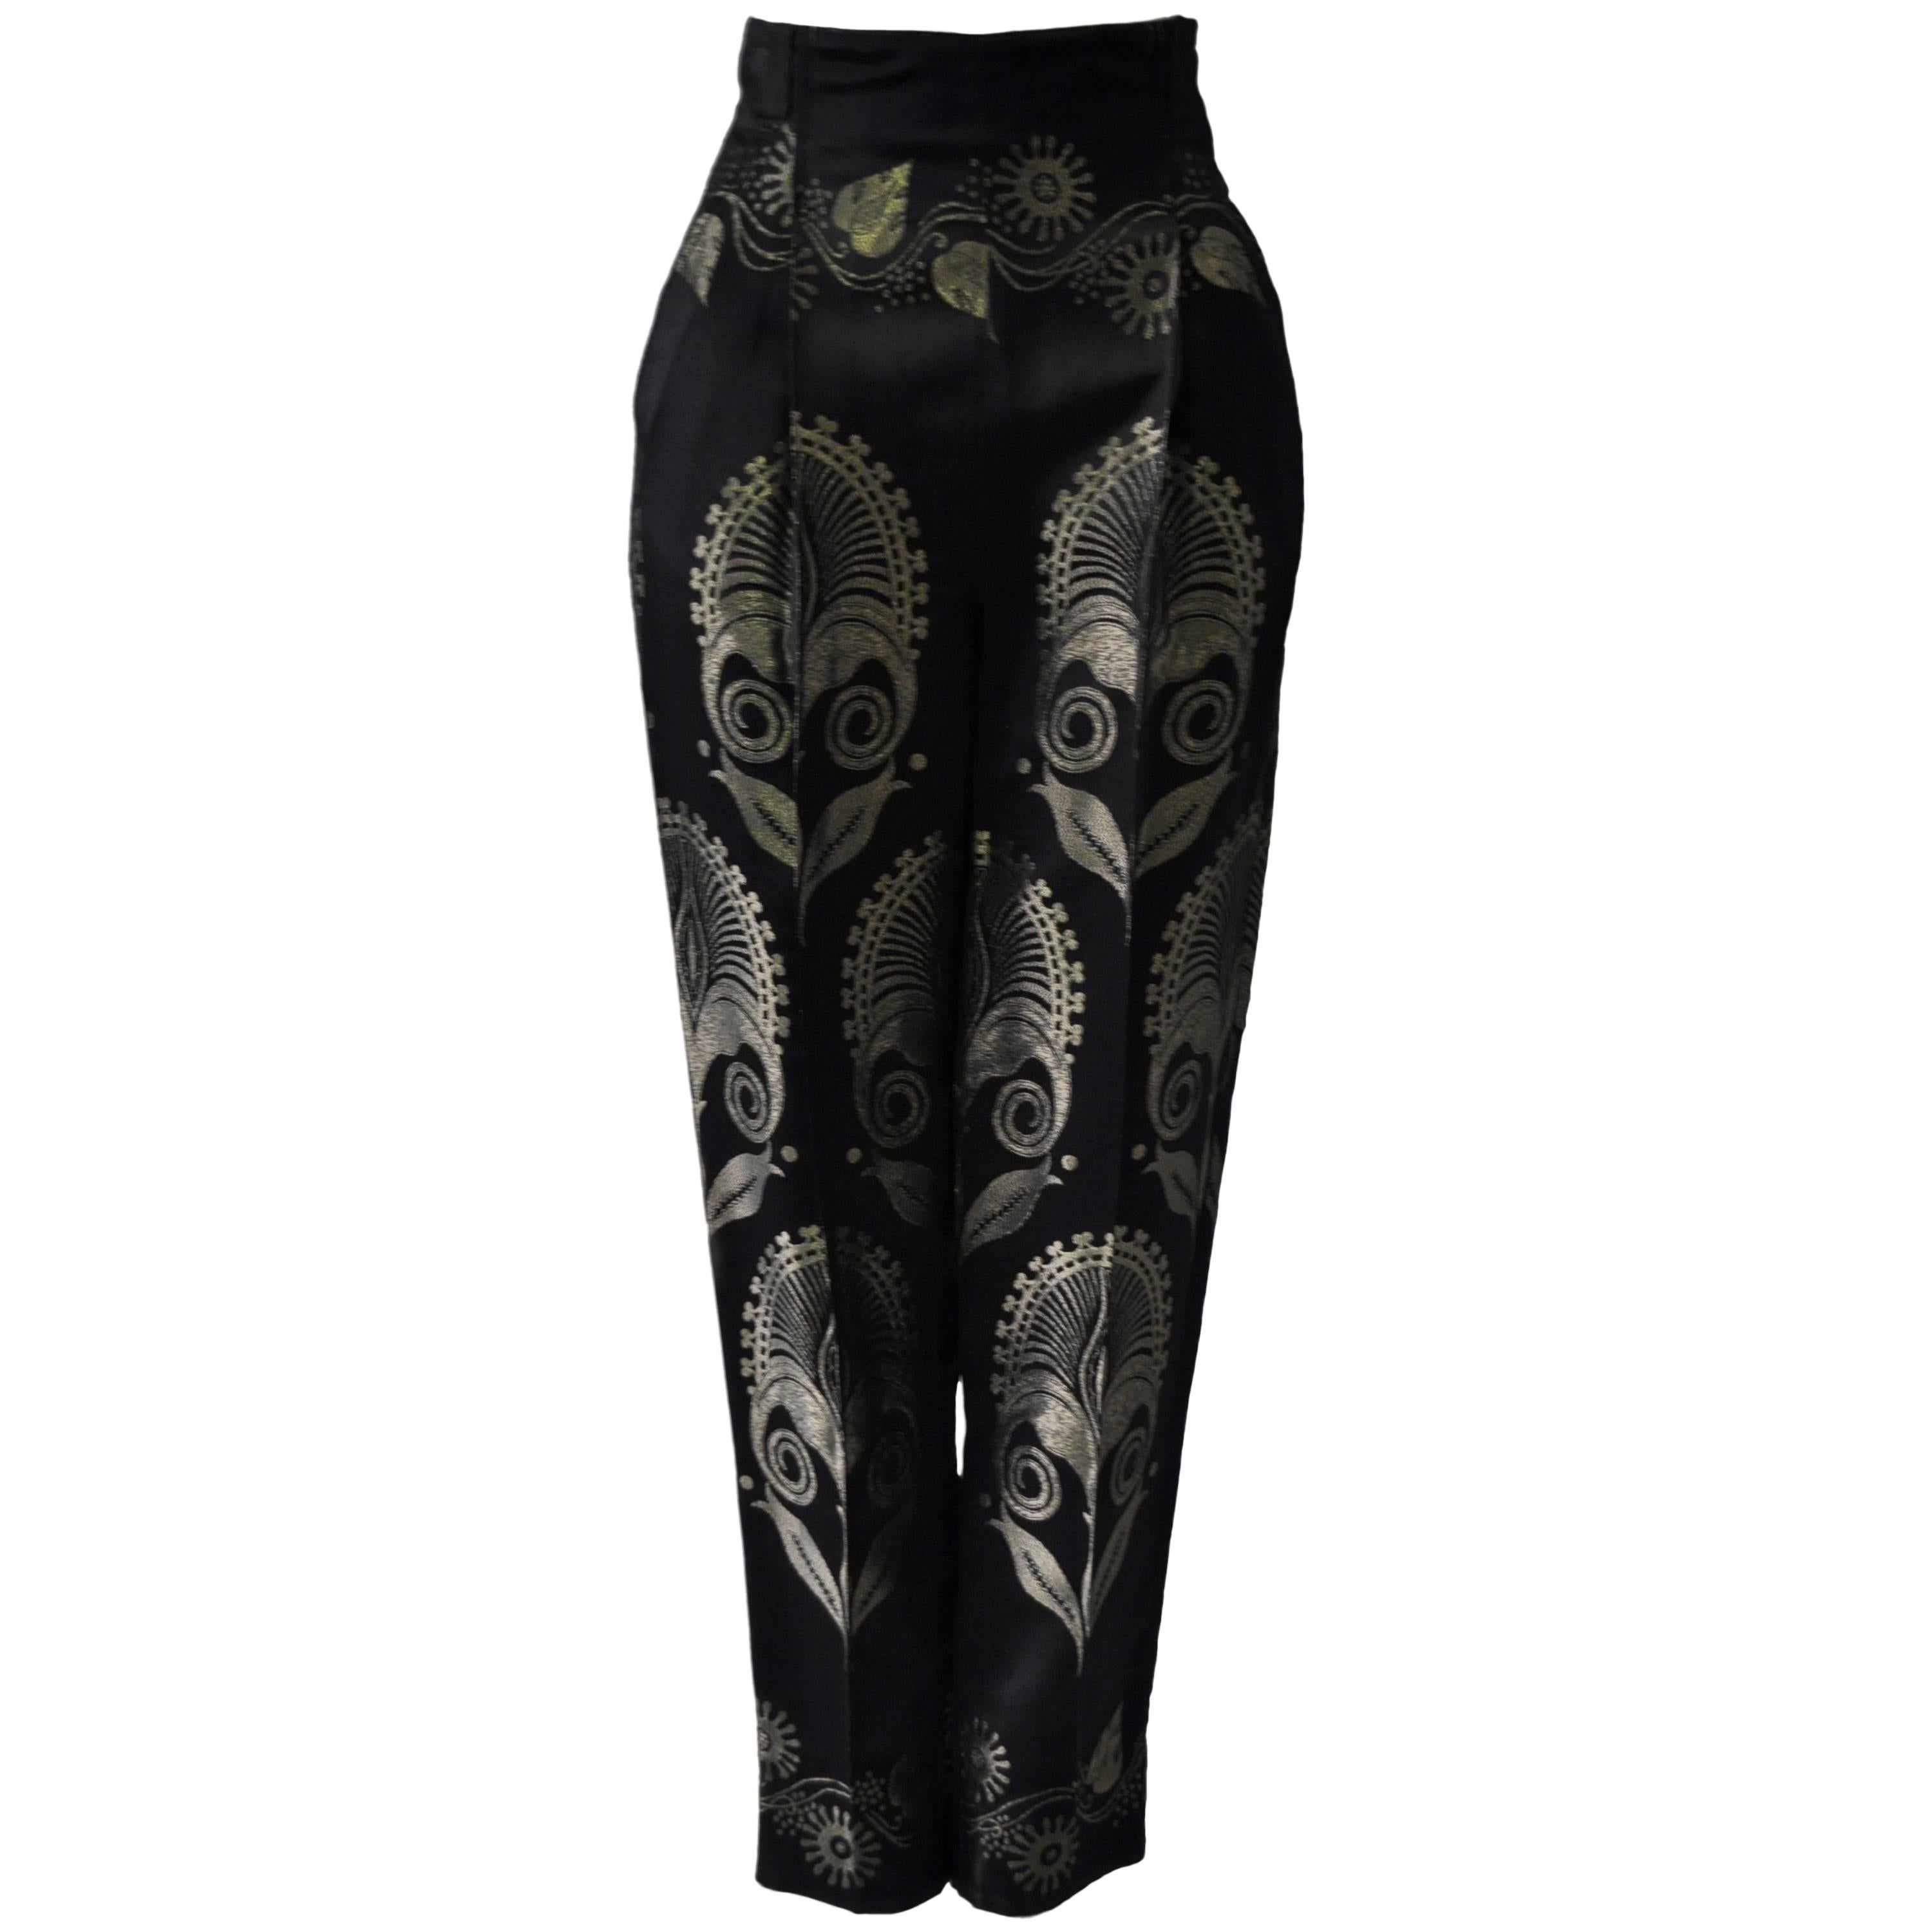 Exquisite Gianni Versace Gold Lame Embroidered Black Silk Pants For Sale